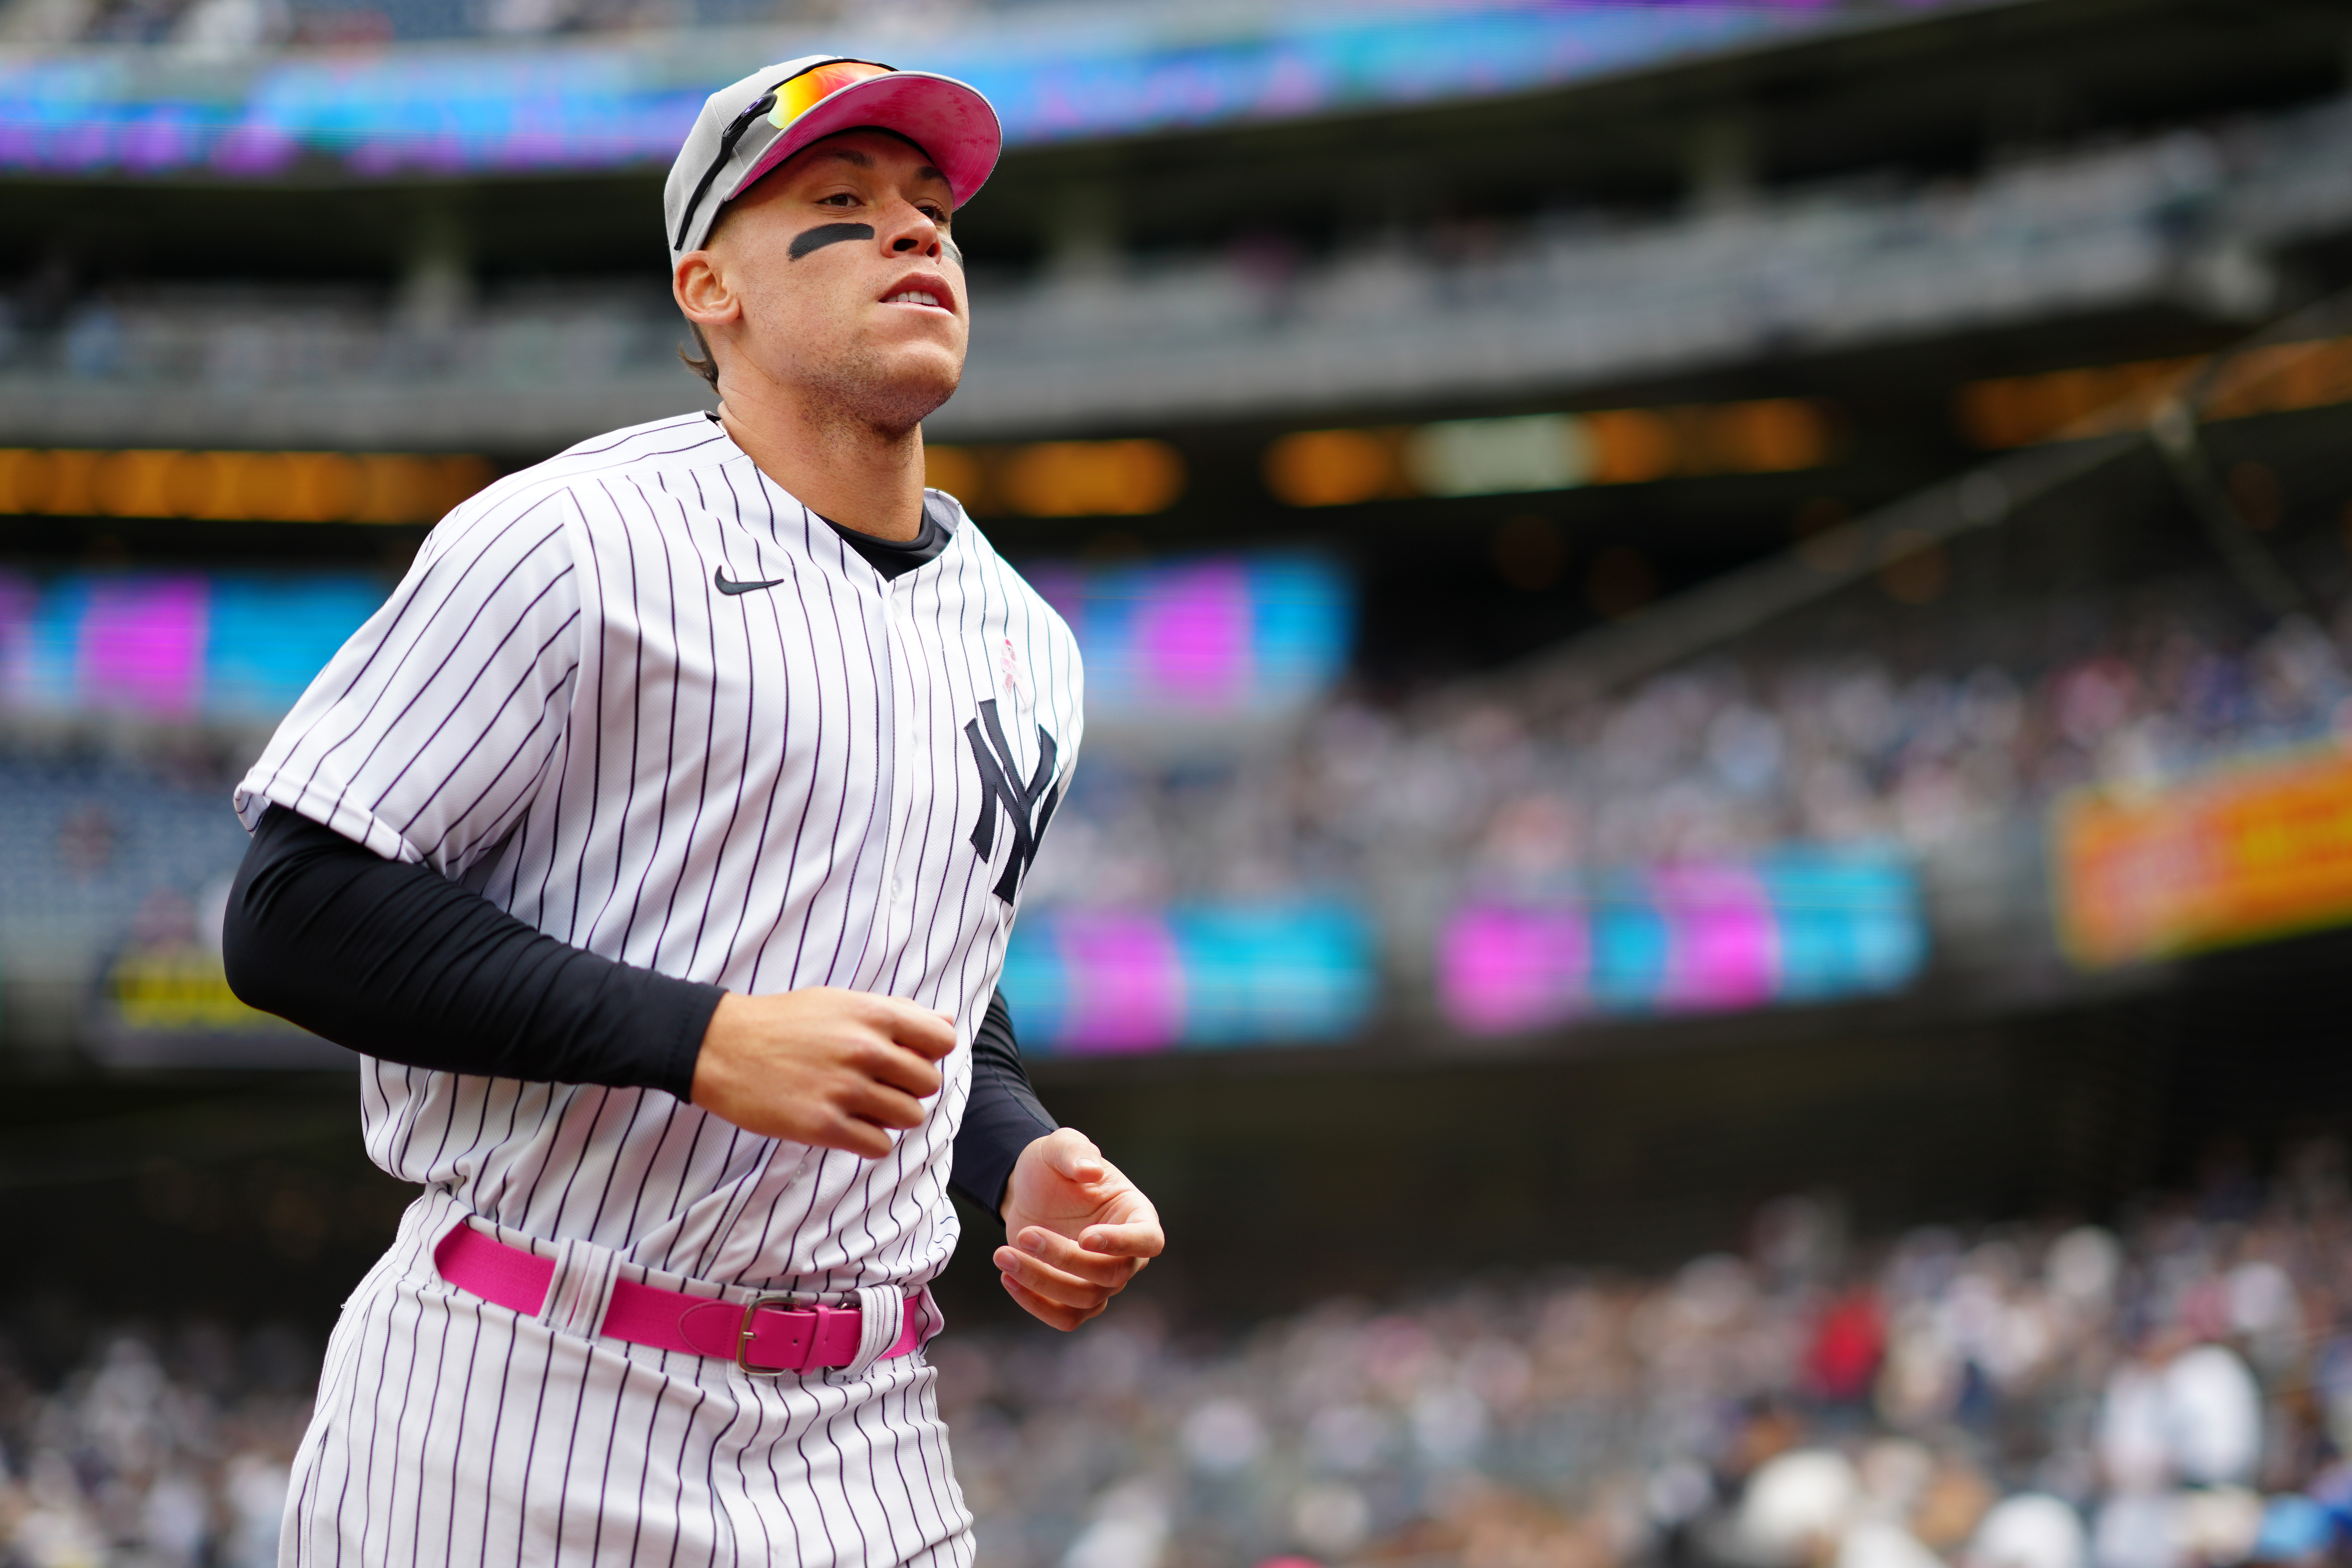 Aaron Judge #99 of the New York Yankees warms up prior to the game between the Texas Rangers and the New York Yankees at Yankee Stadium on Sunday, May 8, 2022 in New York, New York.